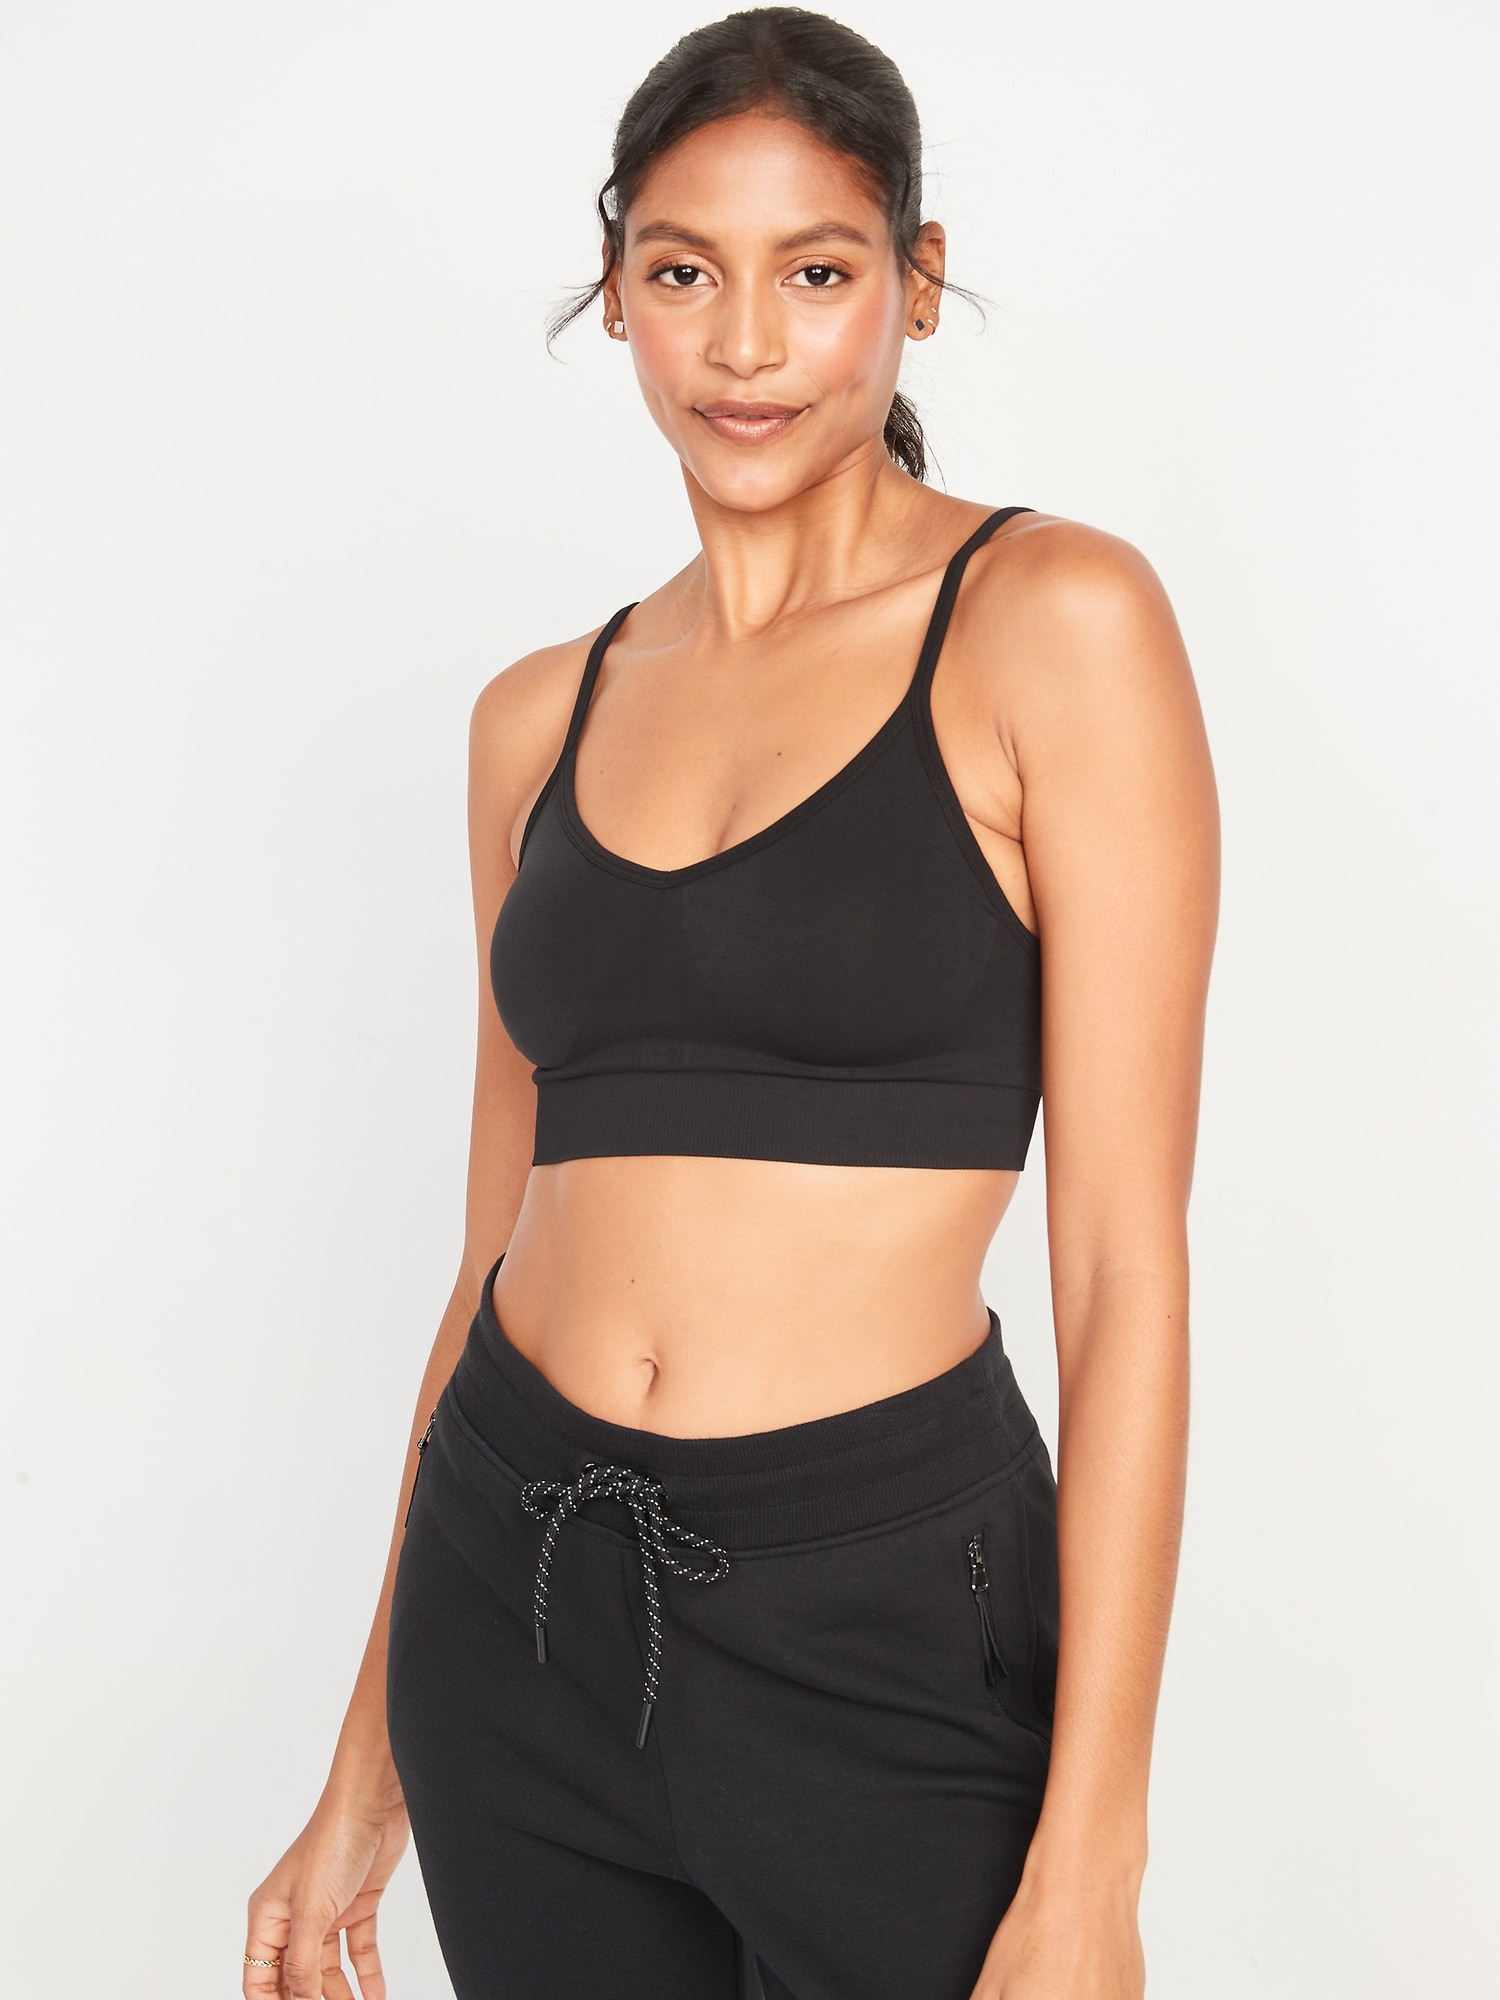 Light Support Seamless Convertible Racerback Sports Bra for Women XS-4X |  Old Navy